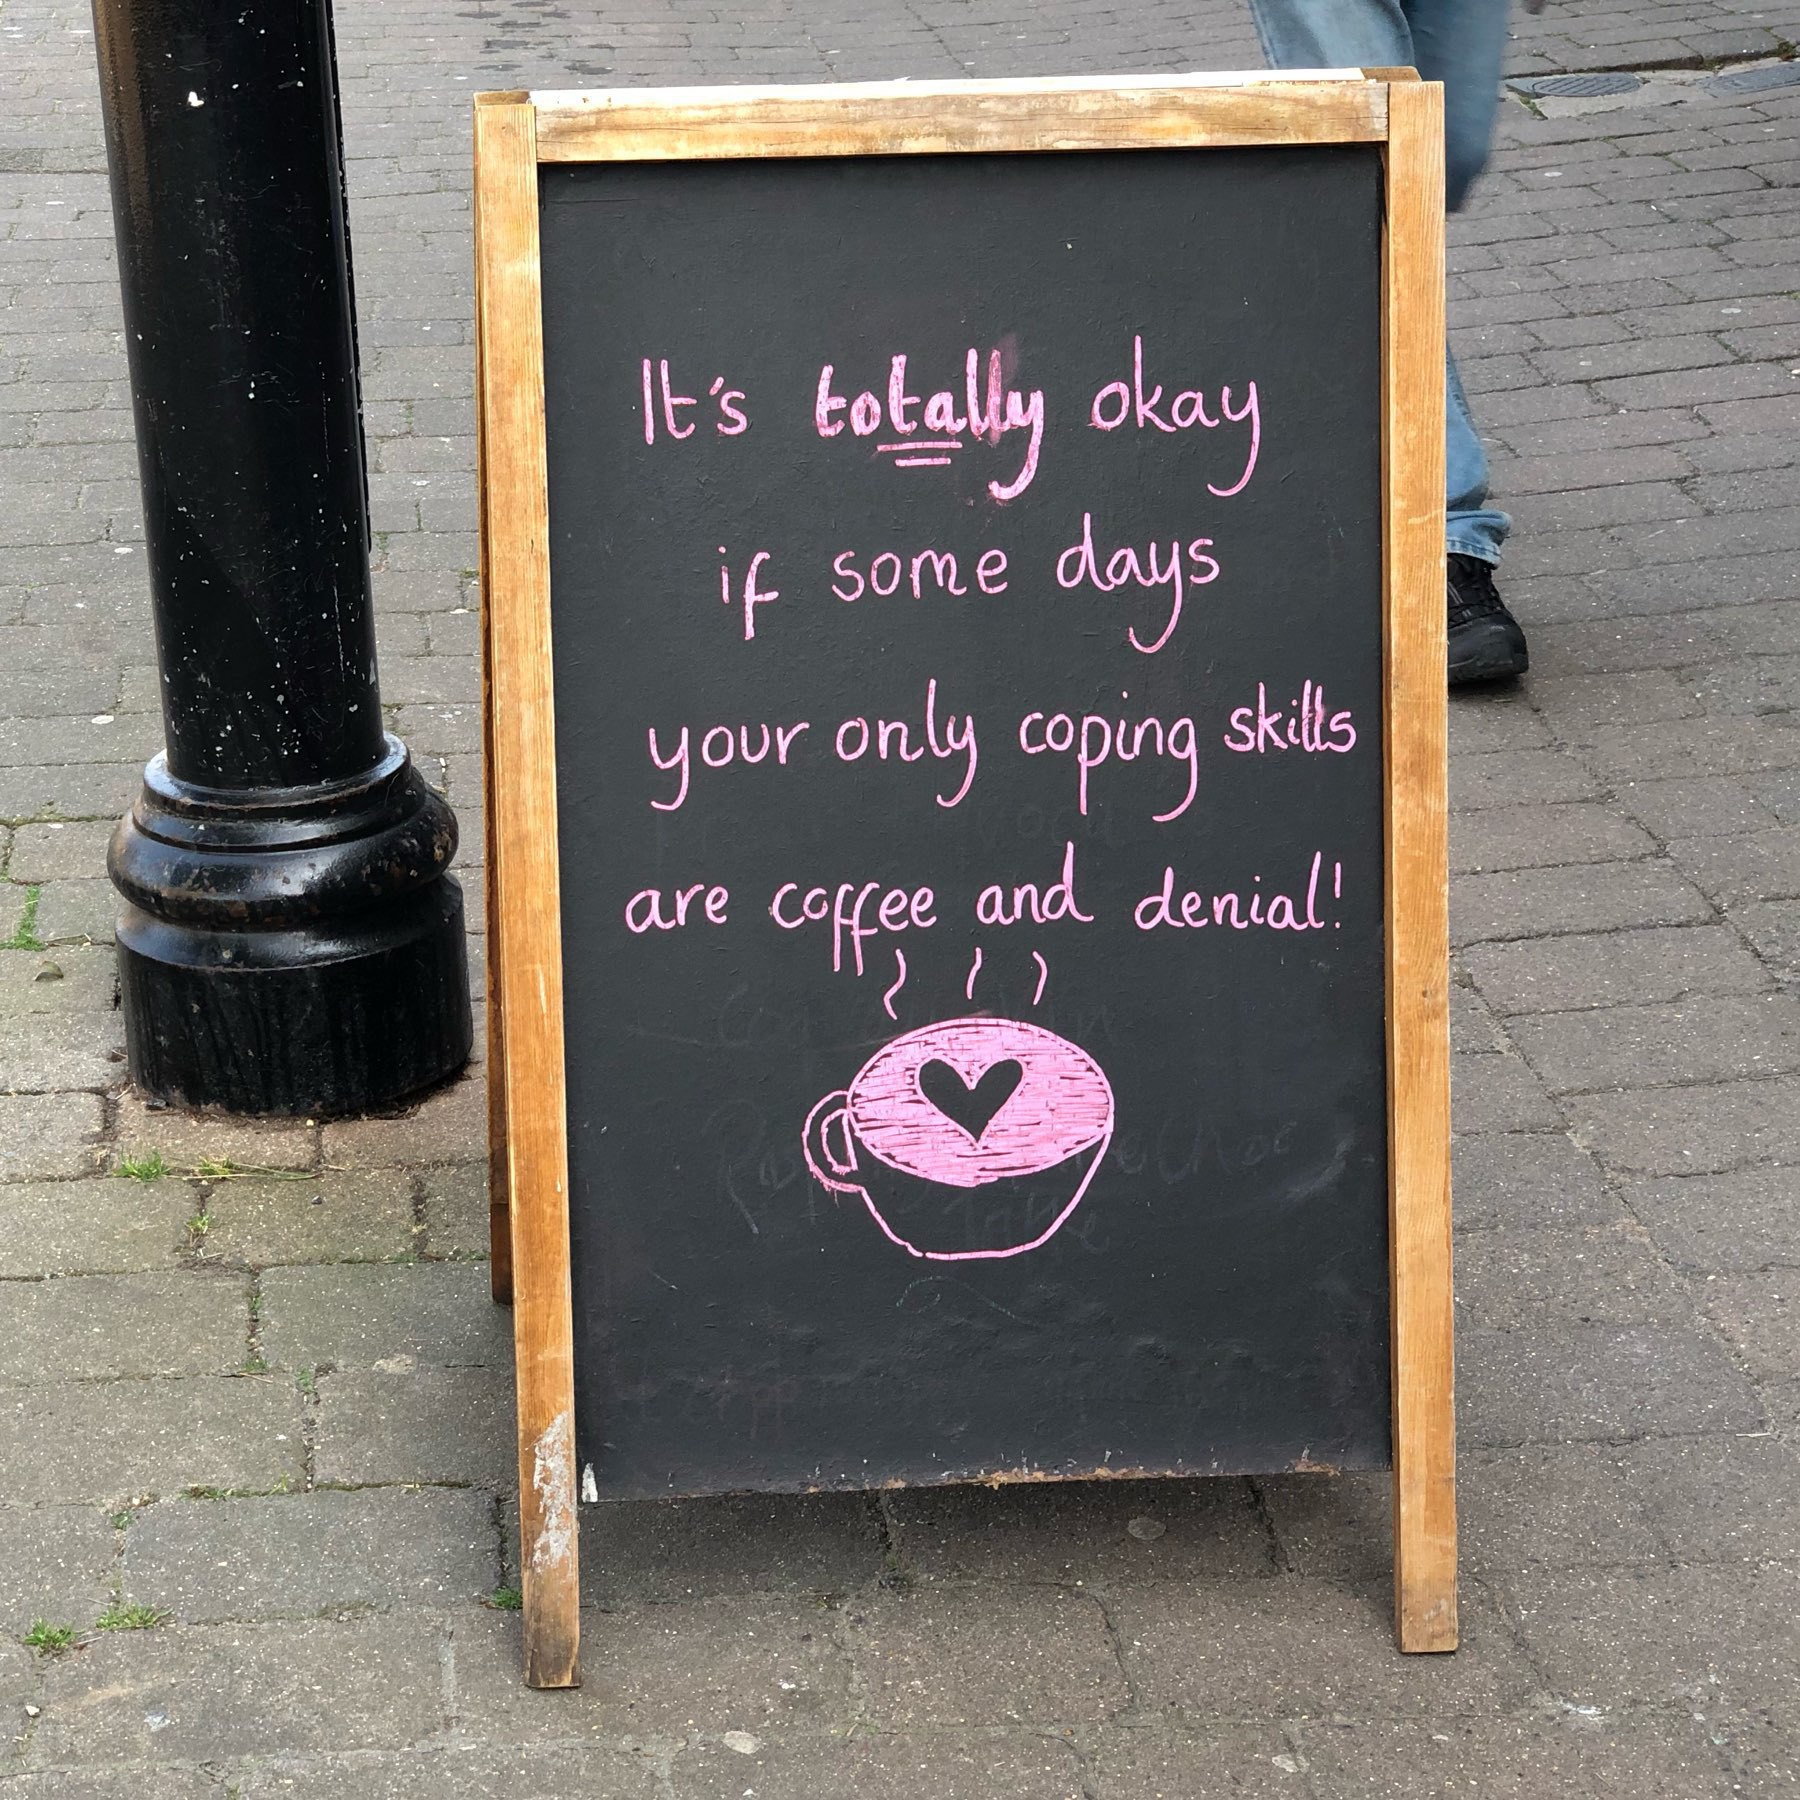 Sign sayin that coffee and denial are coping strategies some days, outside Ginger & Dobbs in Shoreham-by-Sea